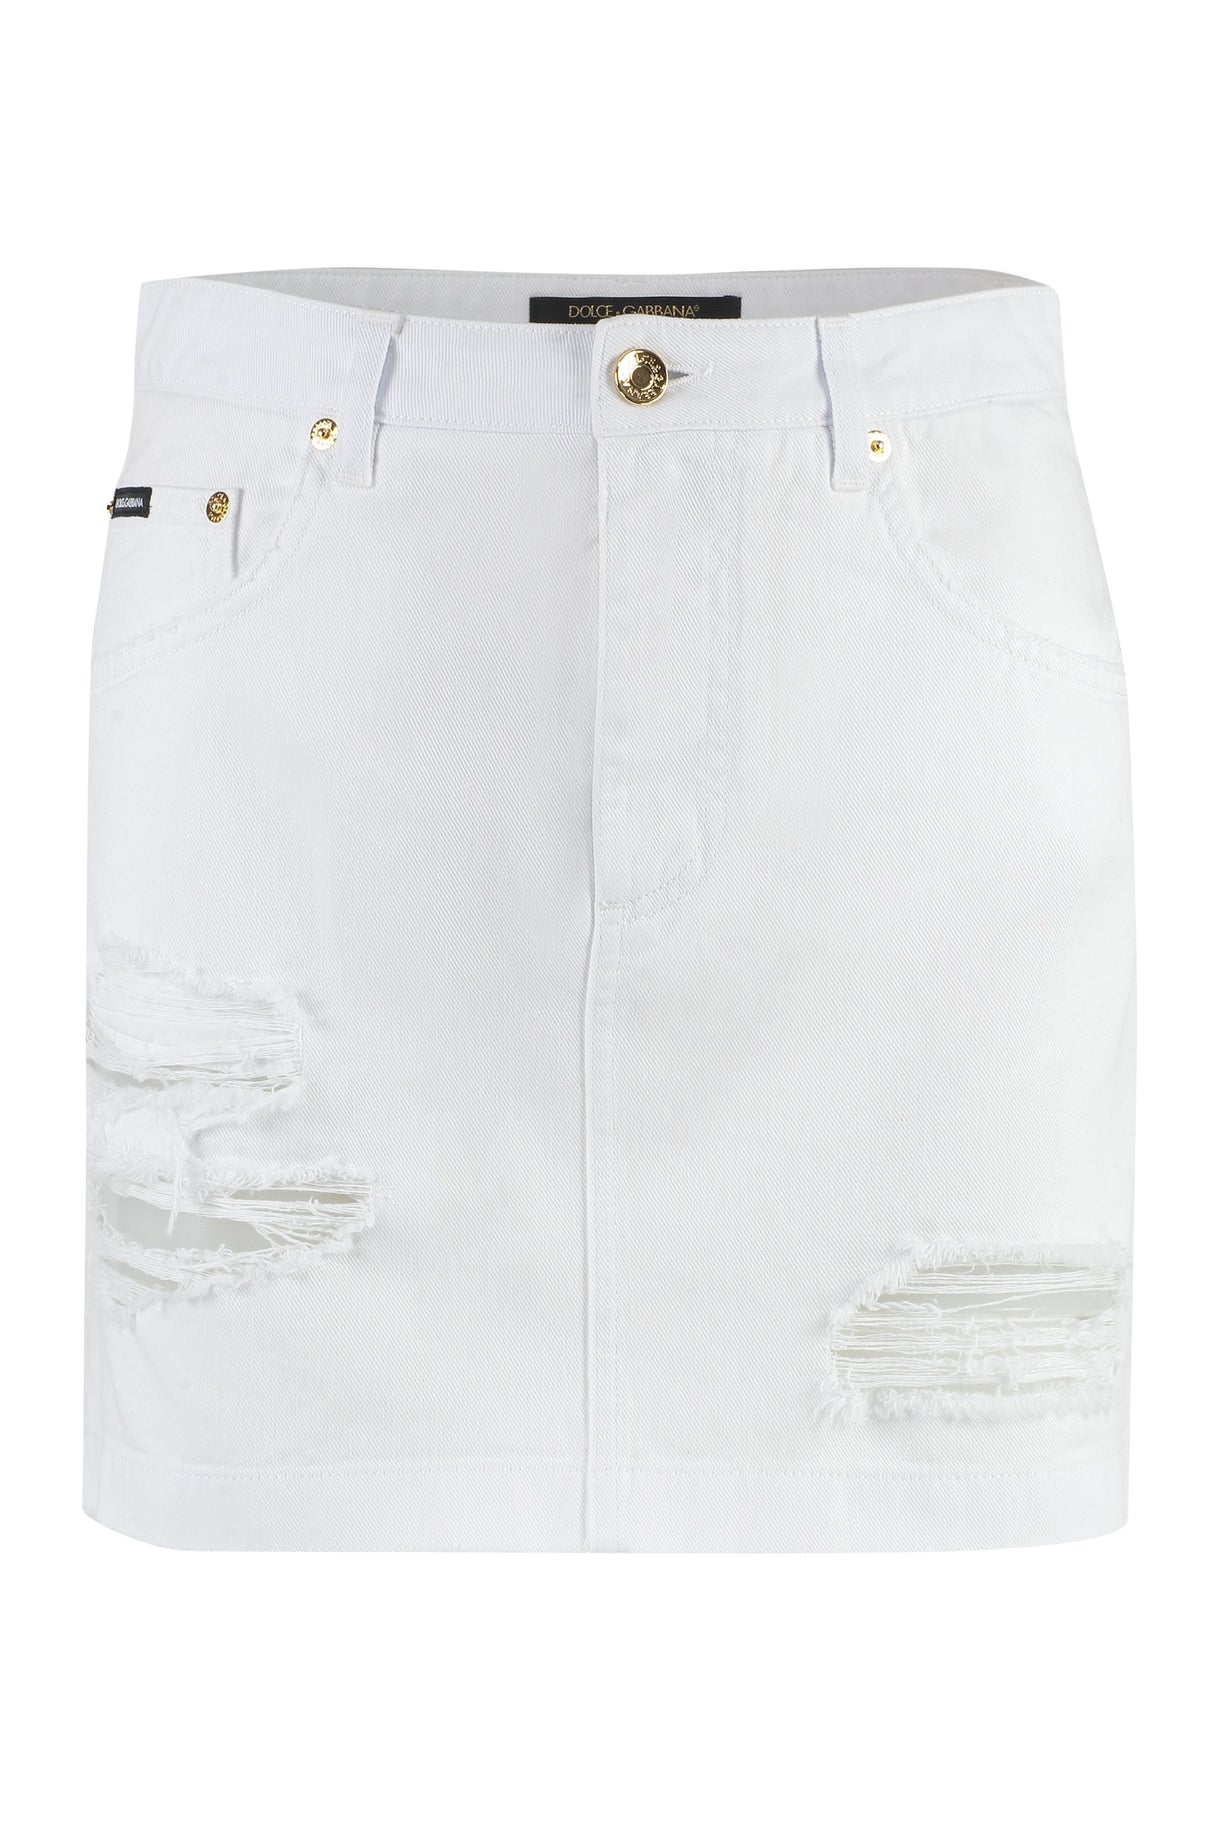 DOLCE & GABBANA Distressed Denim Mini Skirt with Metal Buttons and Rivets for Women, FW23 Collection